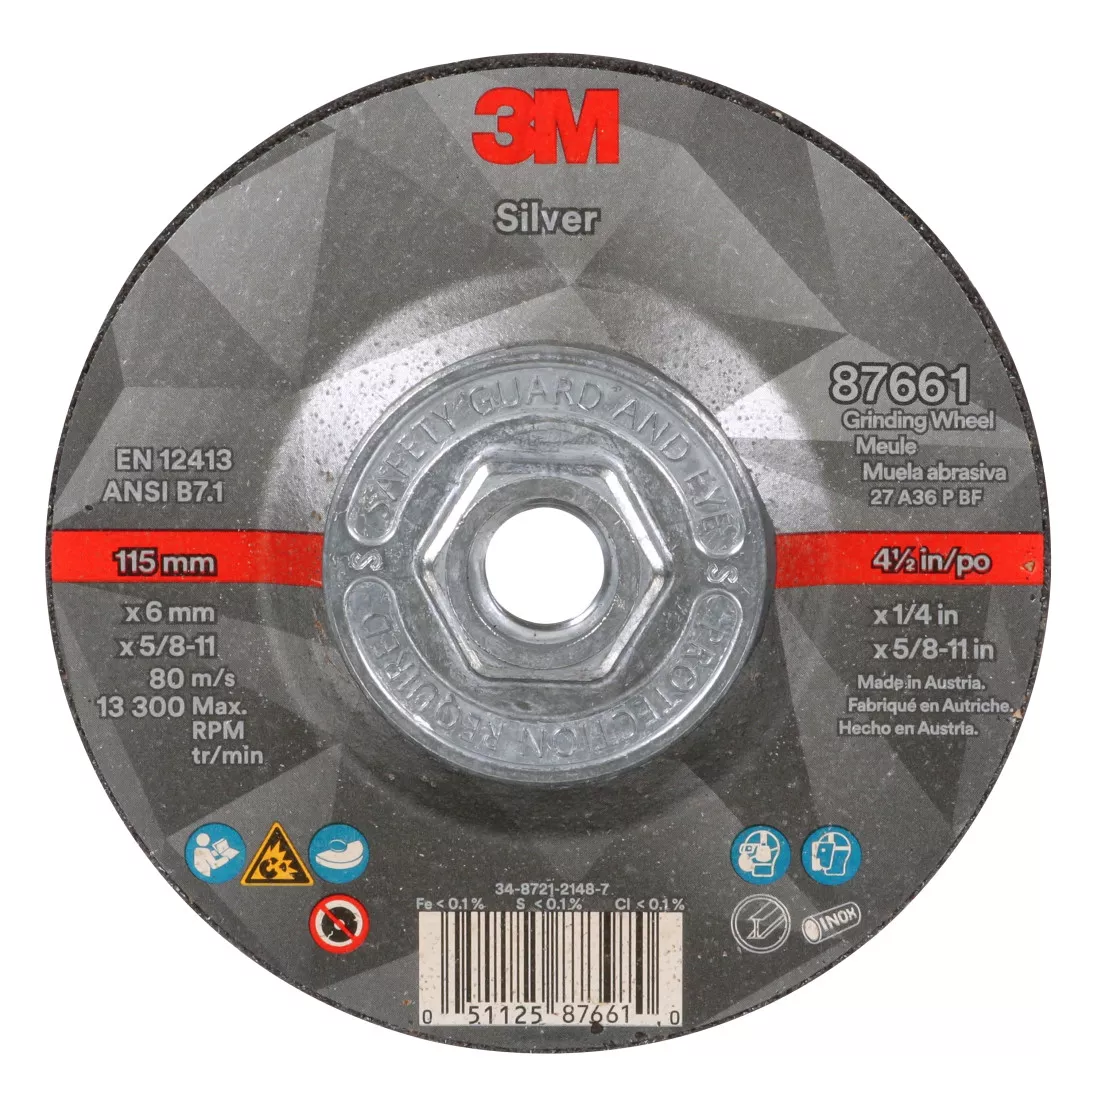 3M™ Silver Depressed Center Grinding Wheel, 87661, T27 Quick Change, 4.5
in x 1/4 in x 5/8-11 in, Single Pack, 10 ea/Case